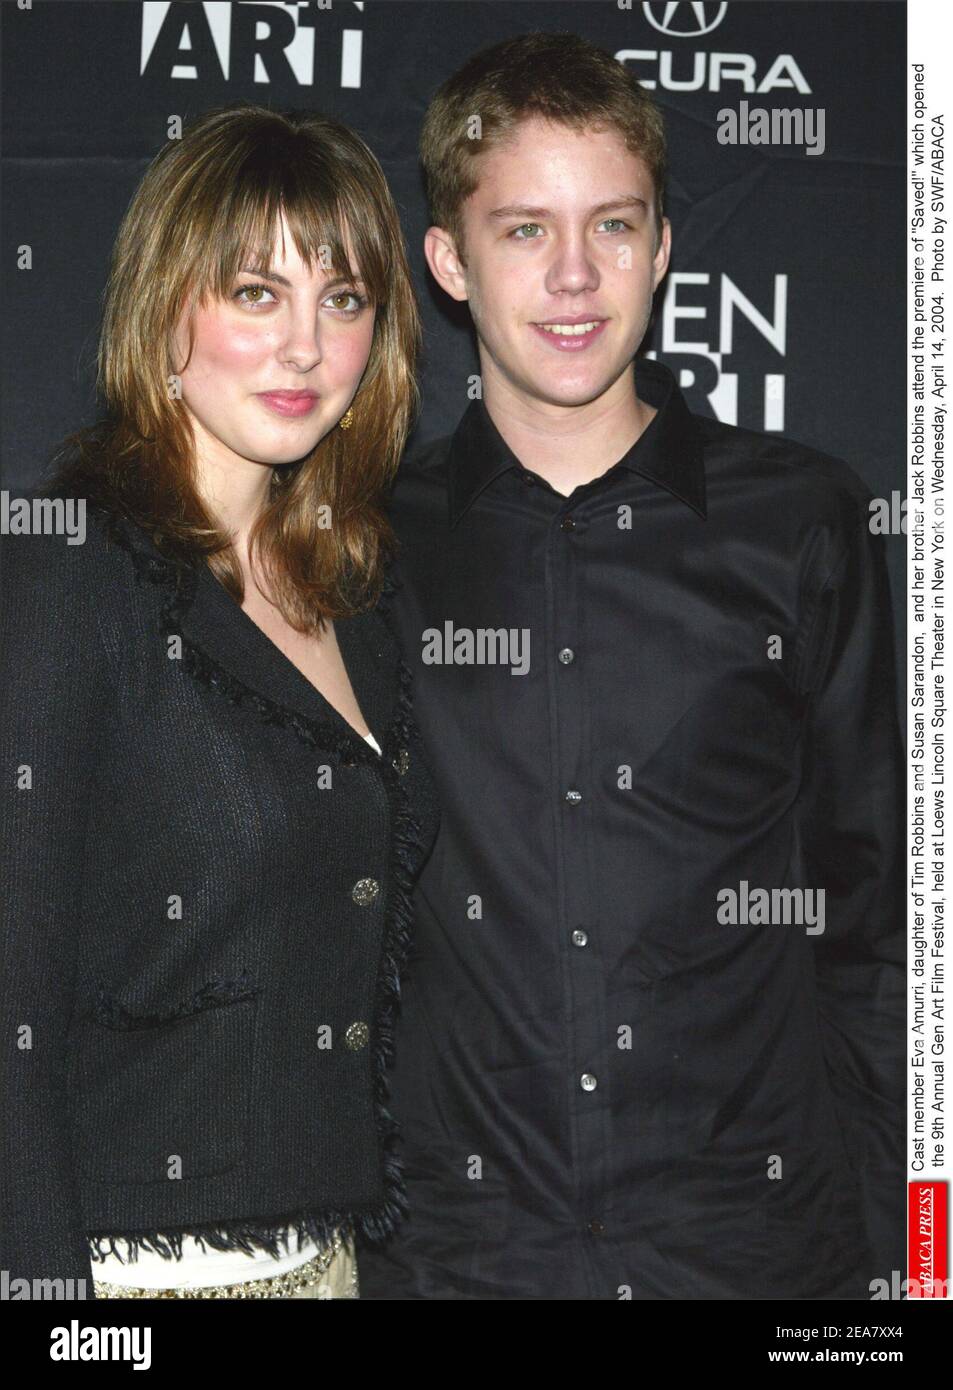 Cast member Eva Amurri, daughter of Tim Robbins and Susan Sarandon, and her brother Jack Robbins attend the premiere of Saved! which opened the 9th Annual Gen Art Film Festival, held at Loews Lincoln Square Theater in New York on Wednesday, April 14, 2004. Photo by SWF/ABACA Stock Photo